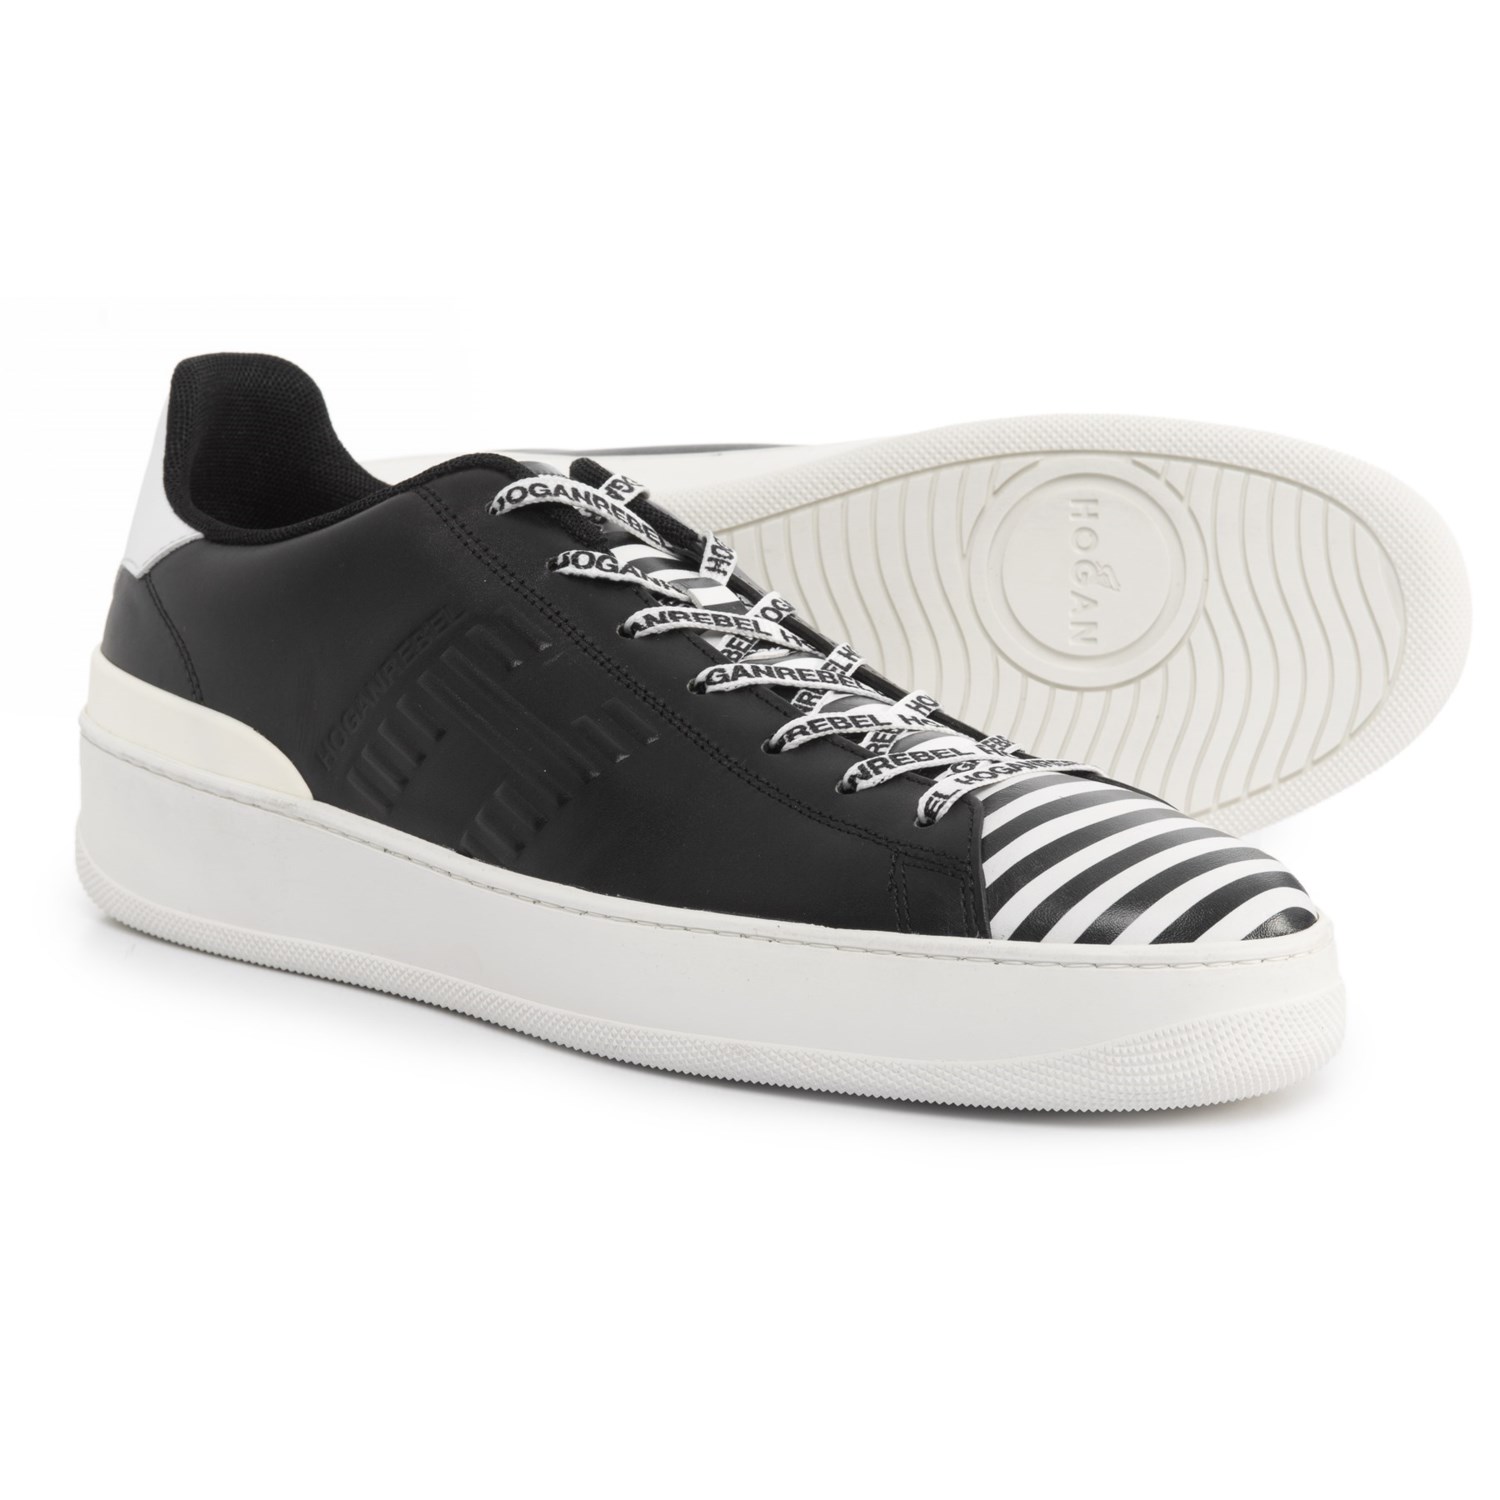 HOGAN Made in Italy Lace-Up Sneakers – Leather (For Men)